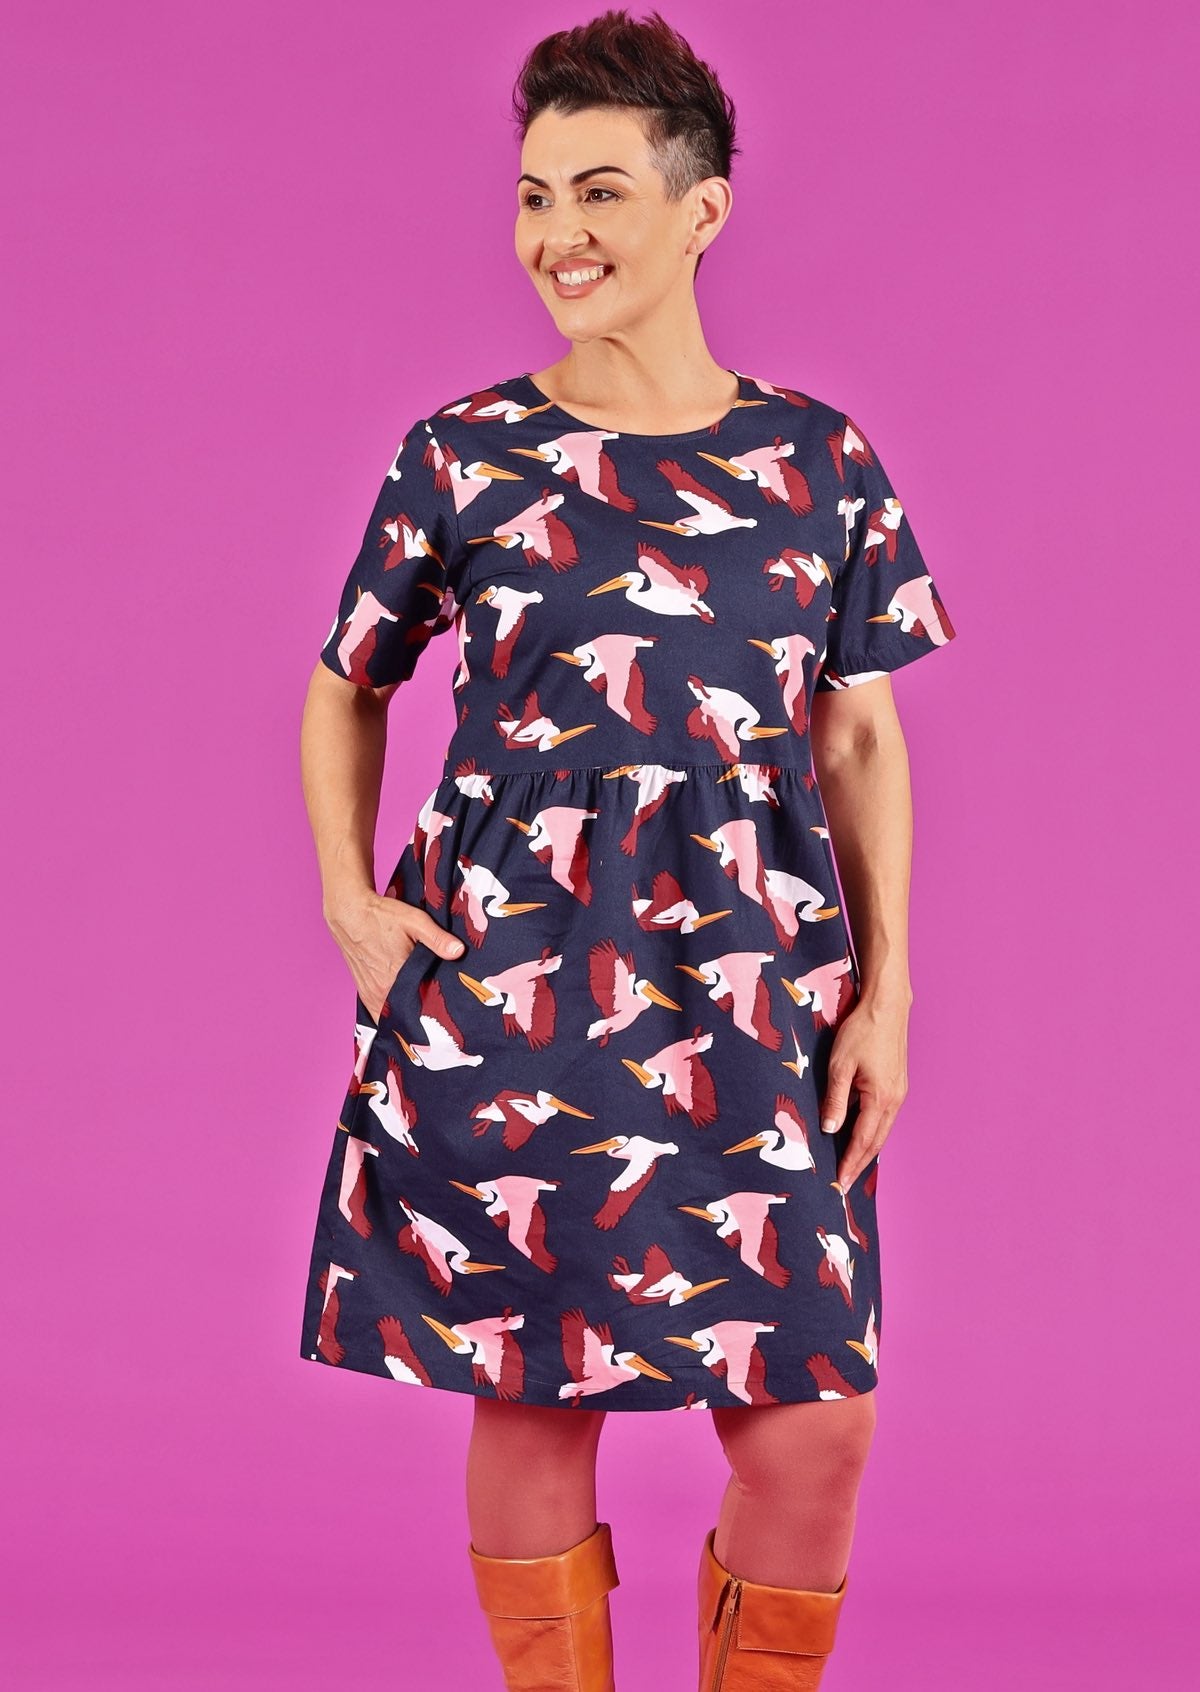 Model wearing flying bird print cotton dress with pockets